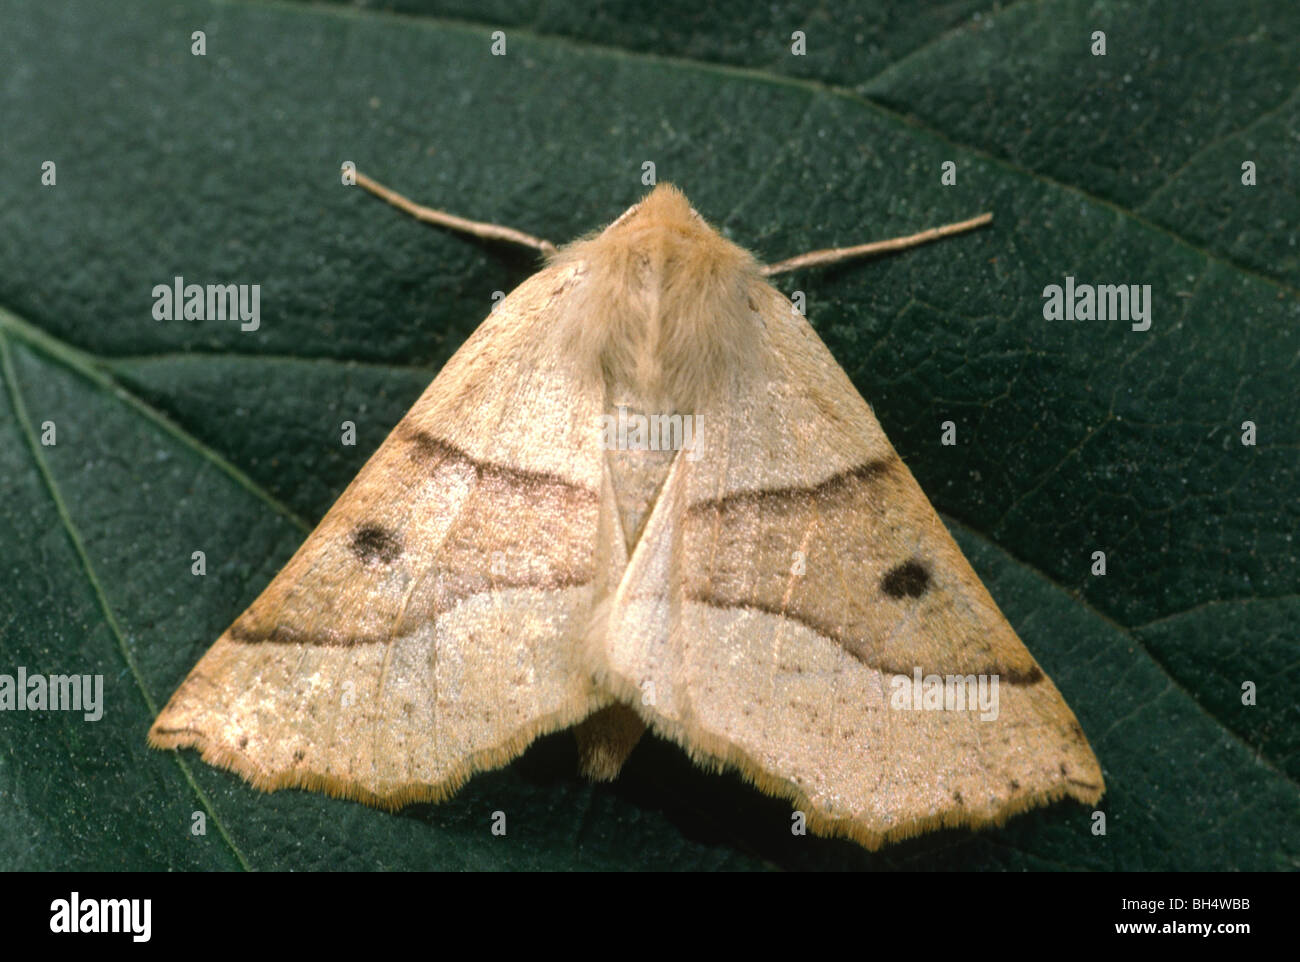 Close-up of a scalloped oak moth (Crocallis elinguaria) resting with open wings in a wood. Stock Photo